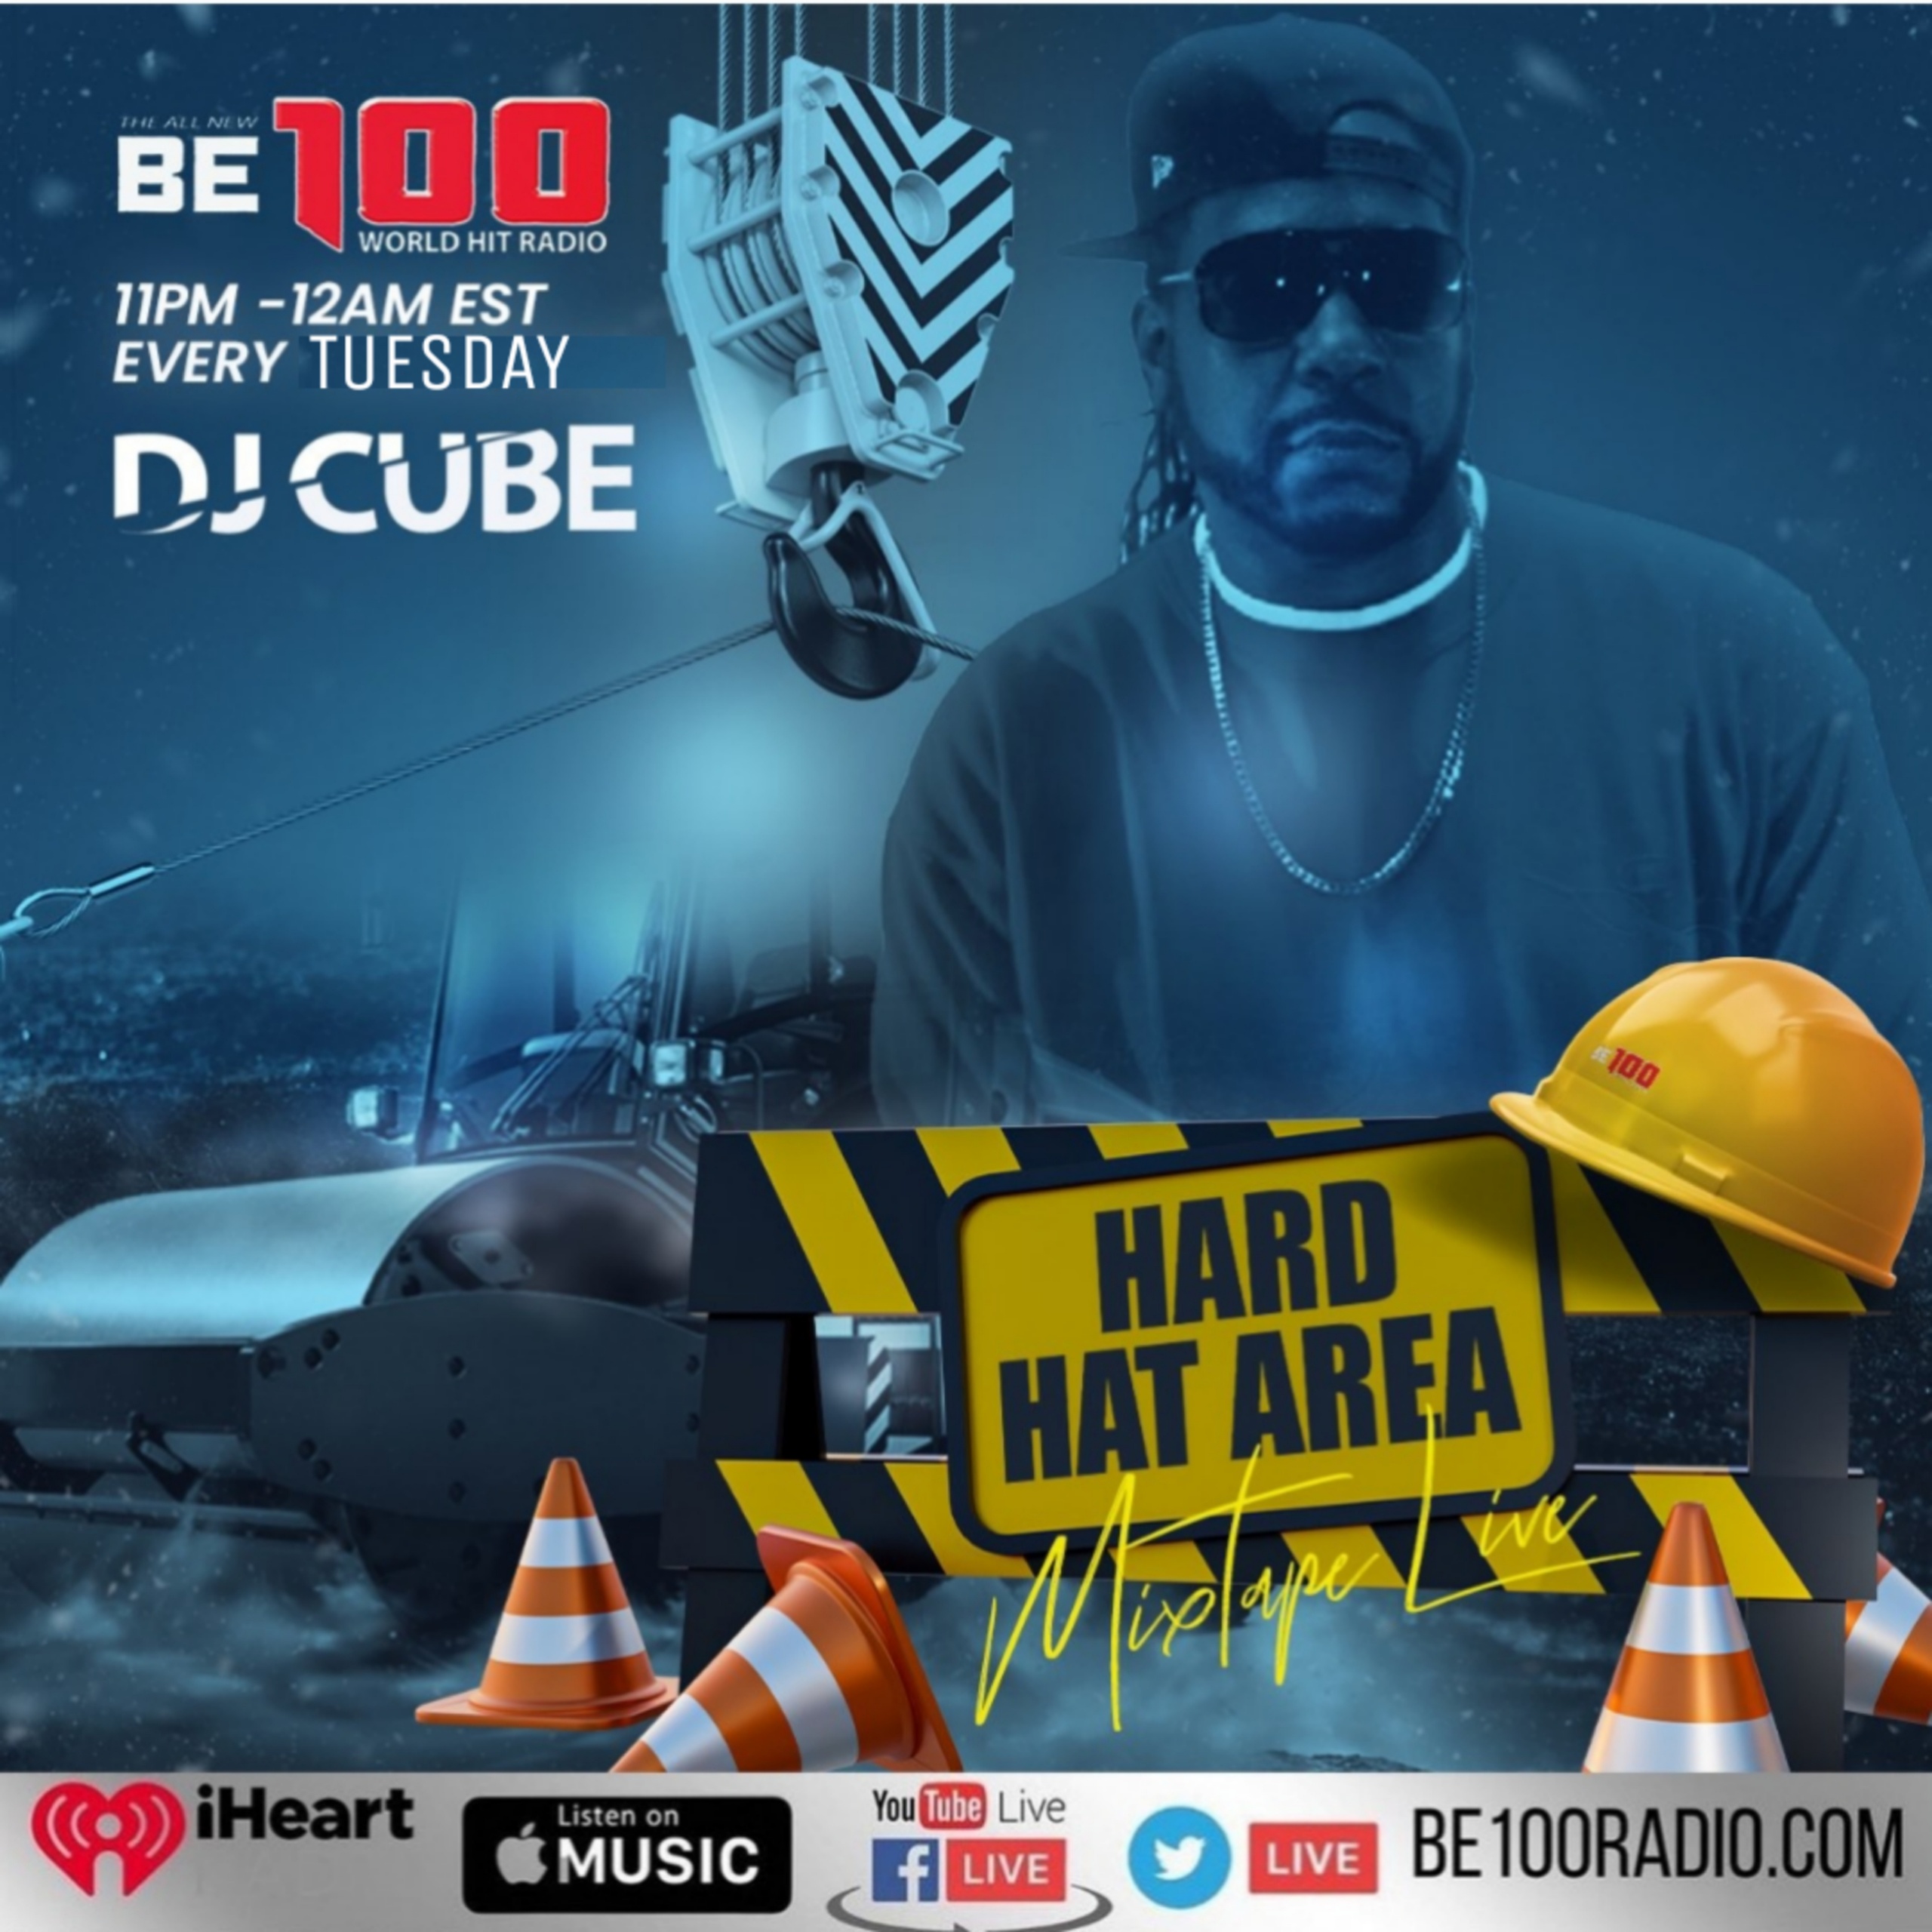 DJ Cube with hard hat area sign